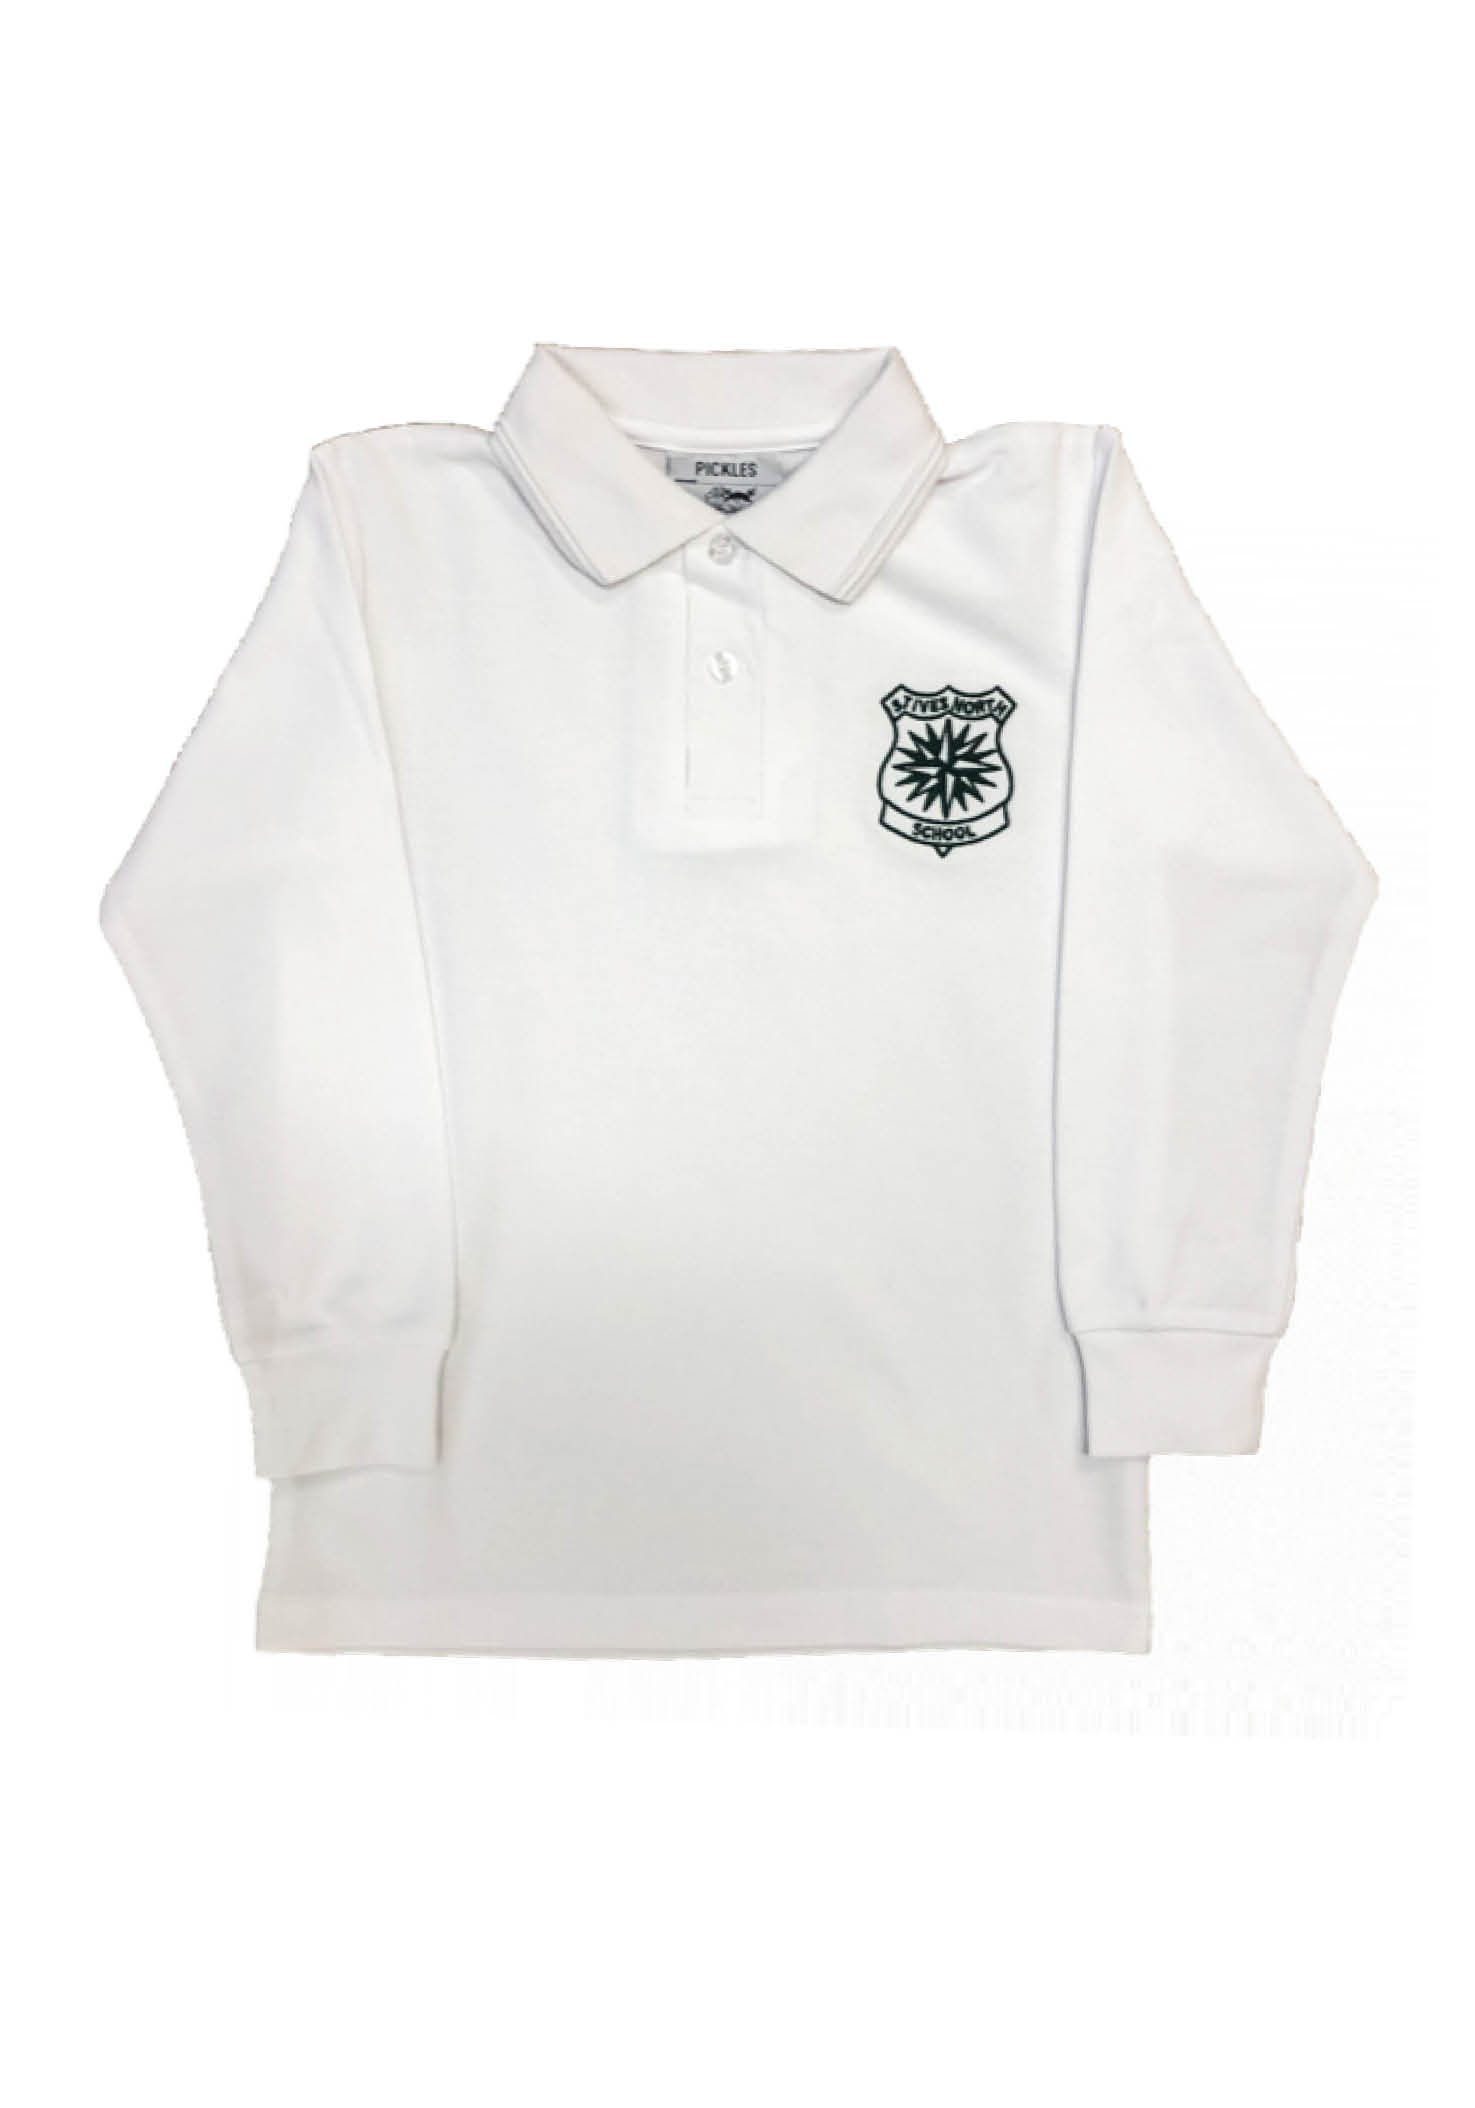 St Ives North Unisex Long Sleeve Polo Shirt | Shop at Pickles ...